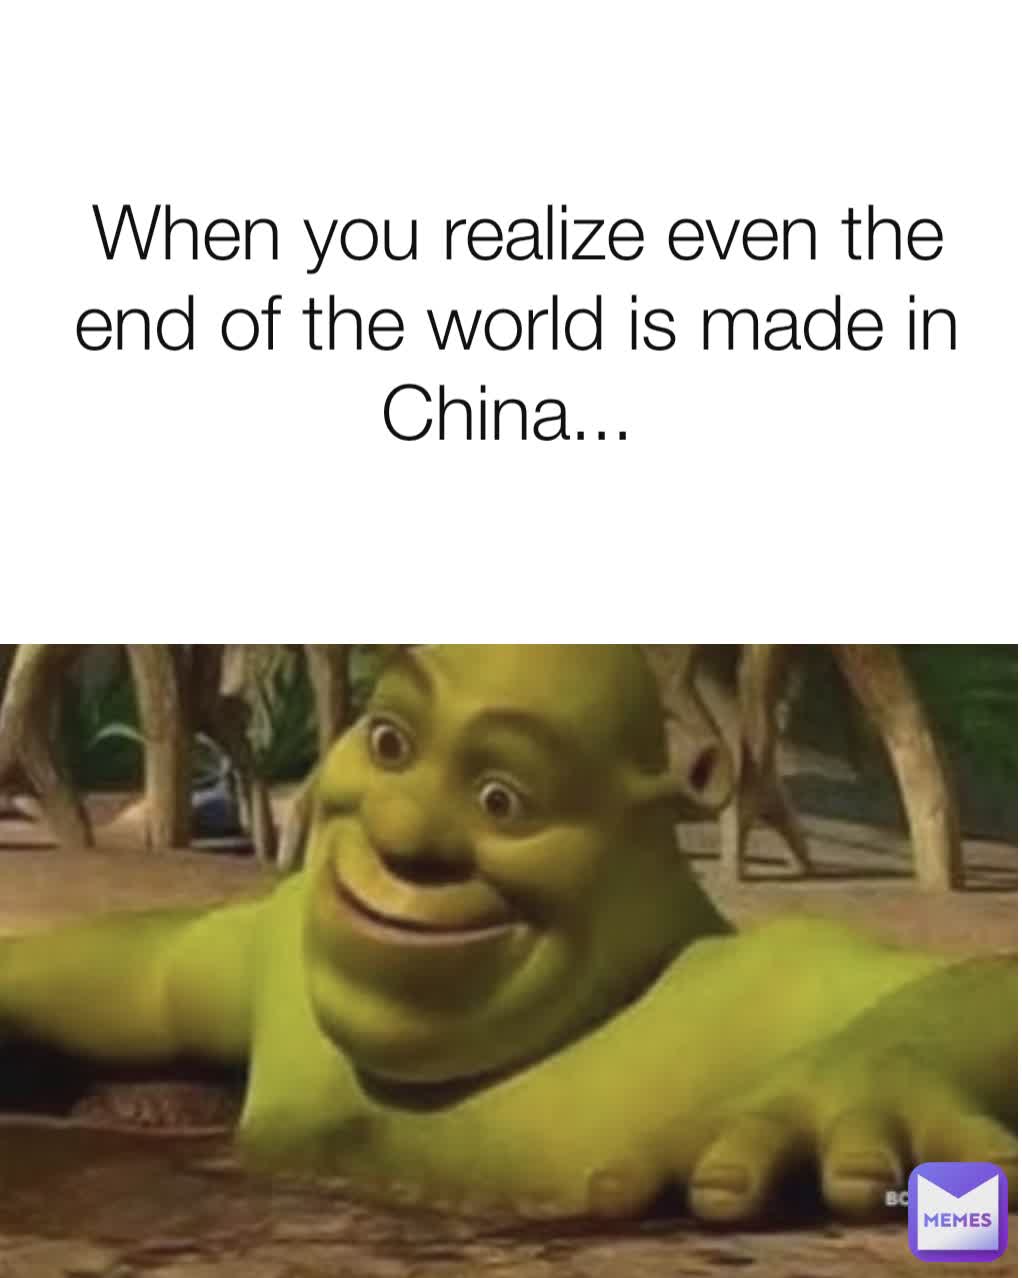 When you realize even the end of the world is made in China... 